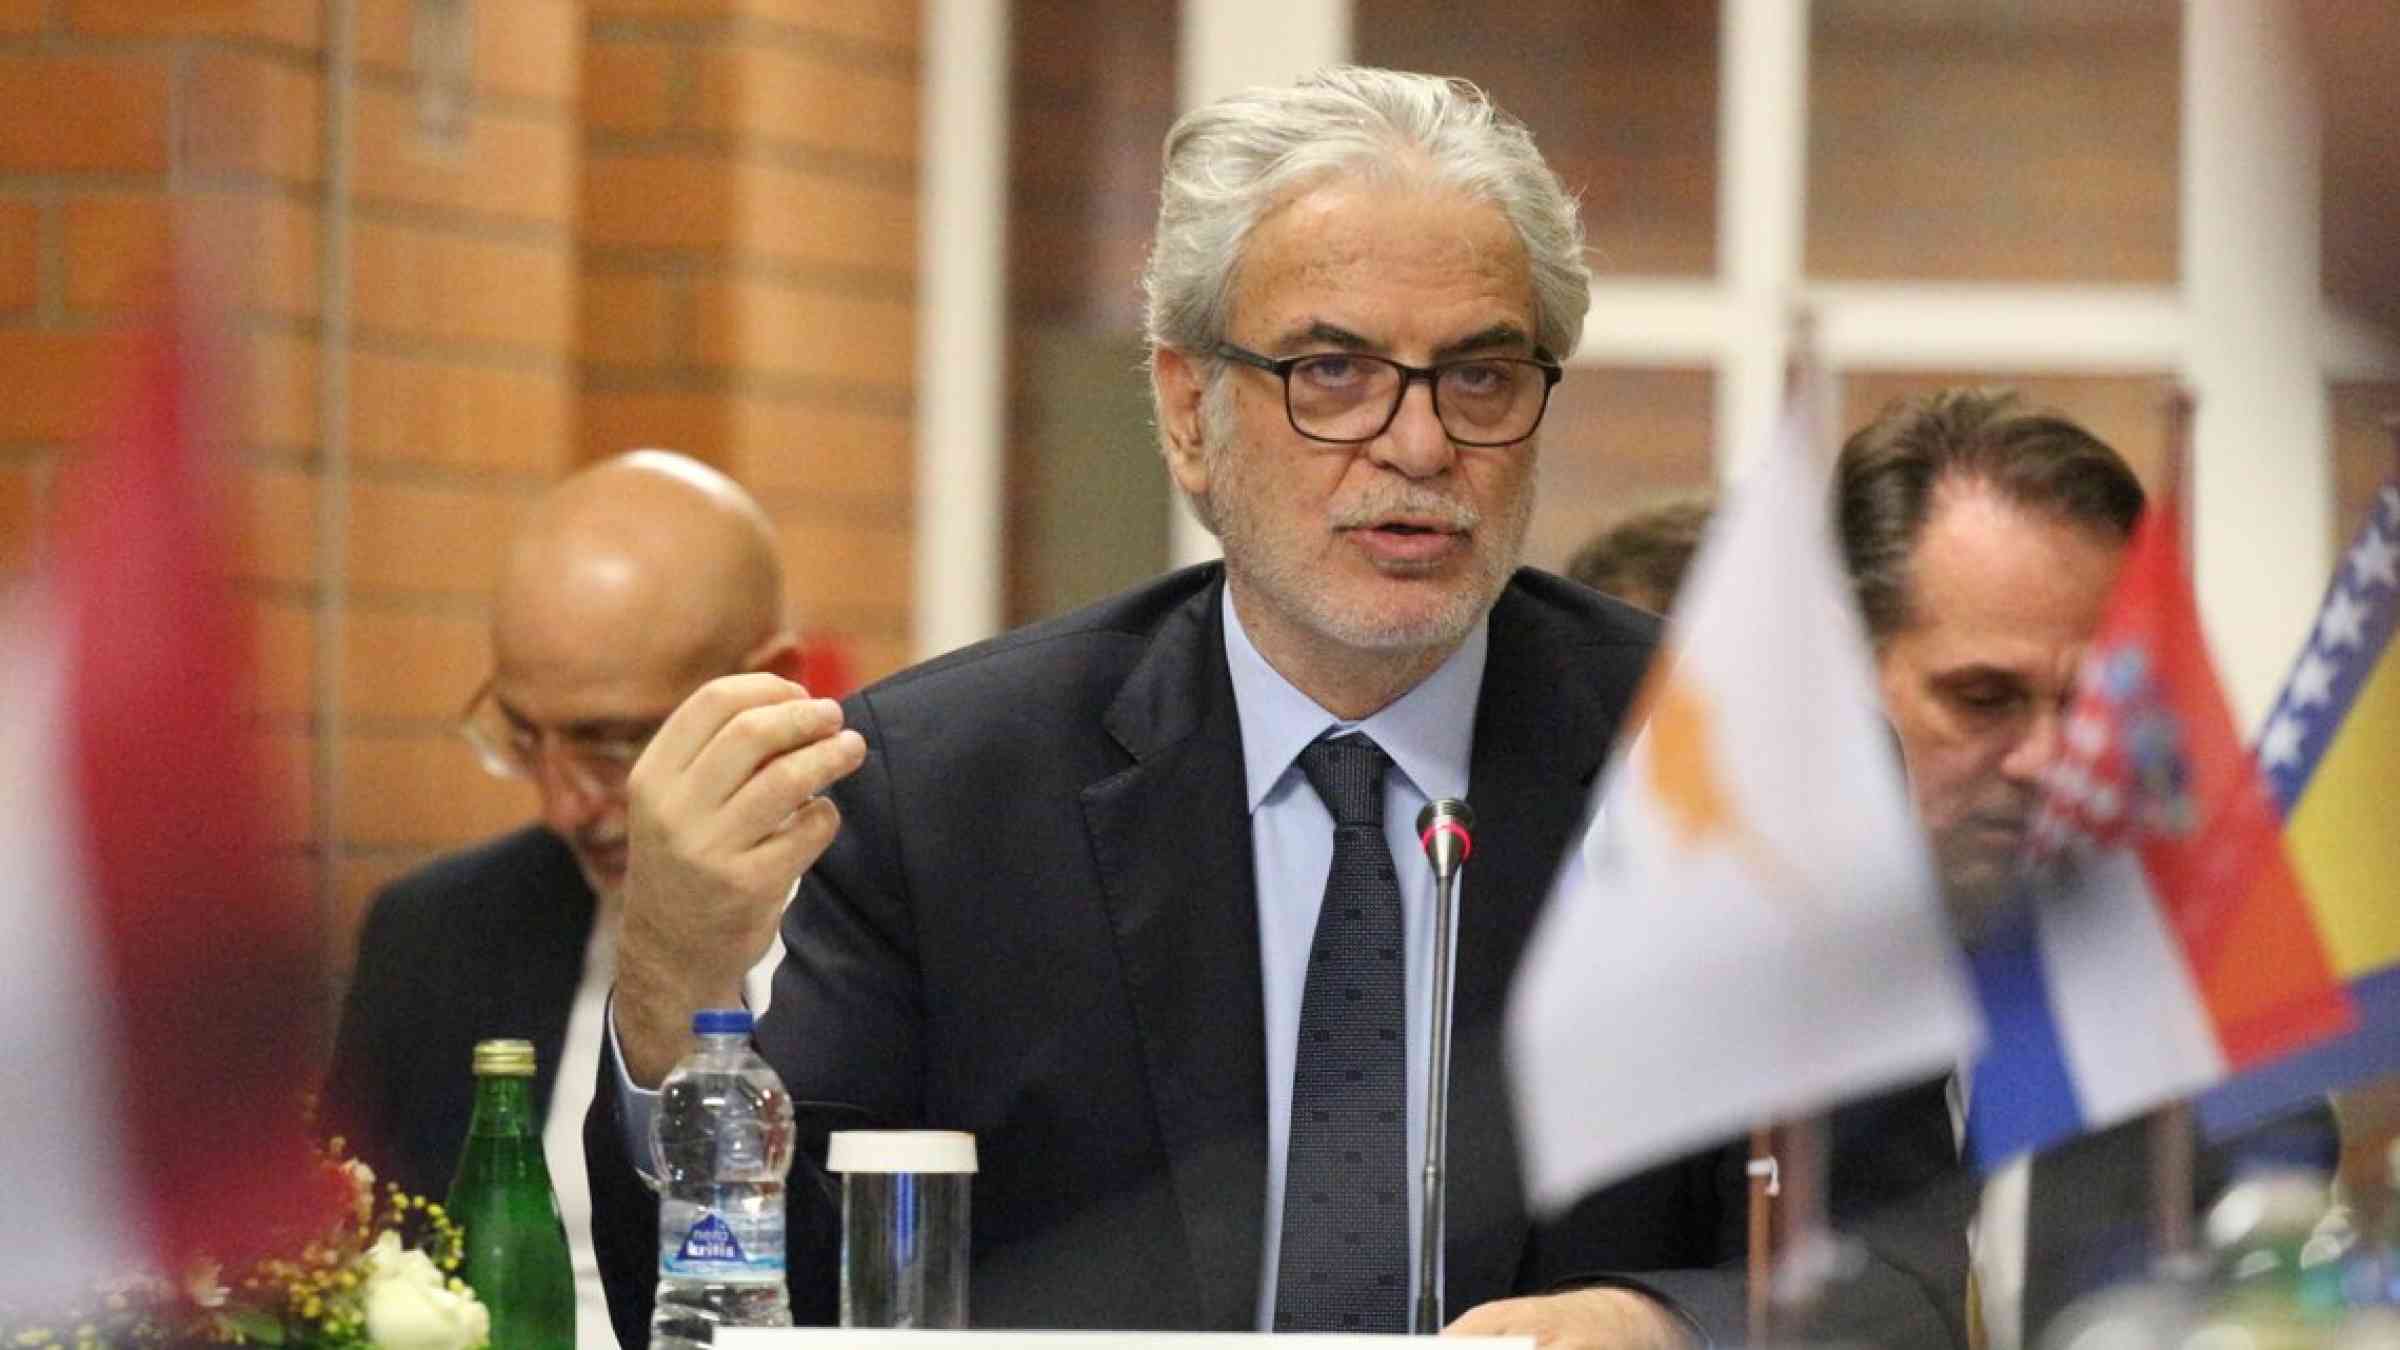 Mr Christos Stylianides, Greece's Minister Climate Crisis speaking during the Action-Oriented Dialogue organized in Athens, Greece on 21 October 2022.